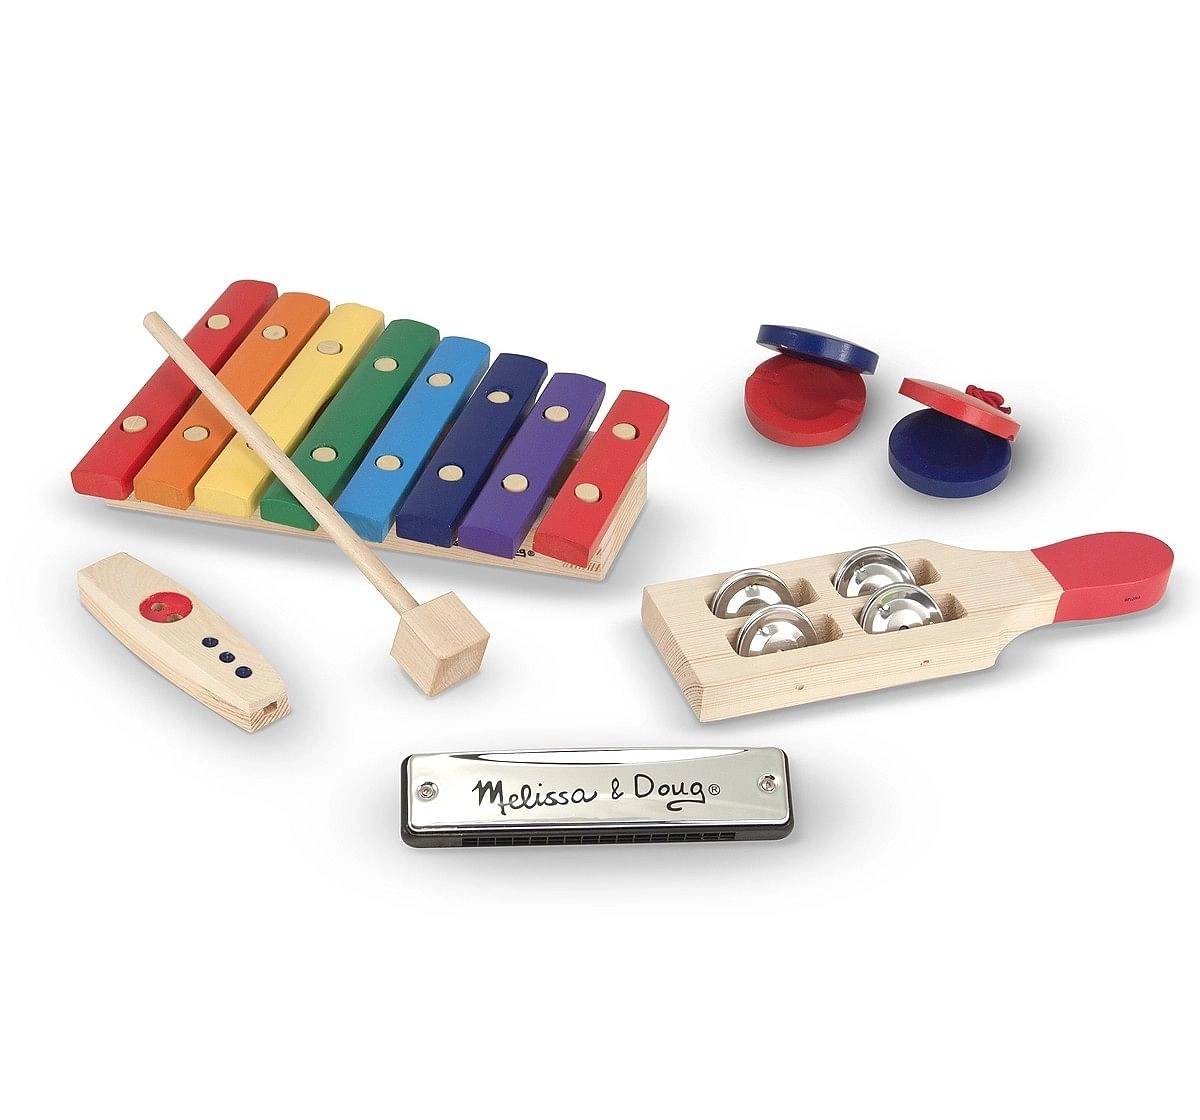 Melissa & Doug : Beginners band set Musical Toys for Kids age 3Y+ 